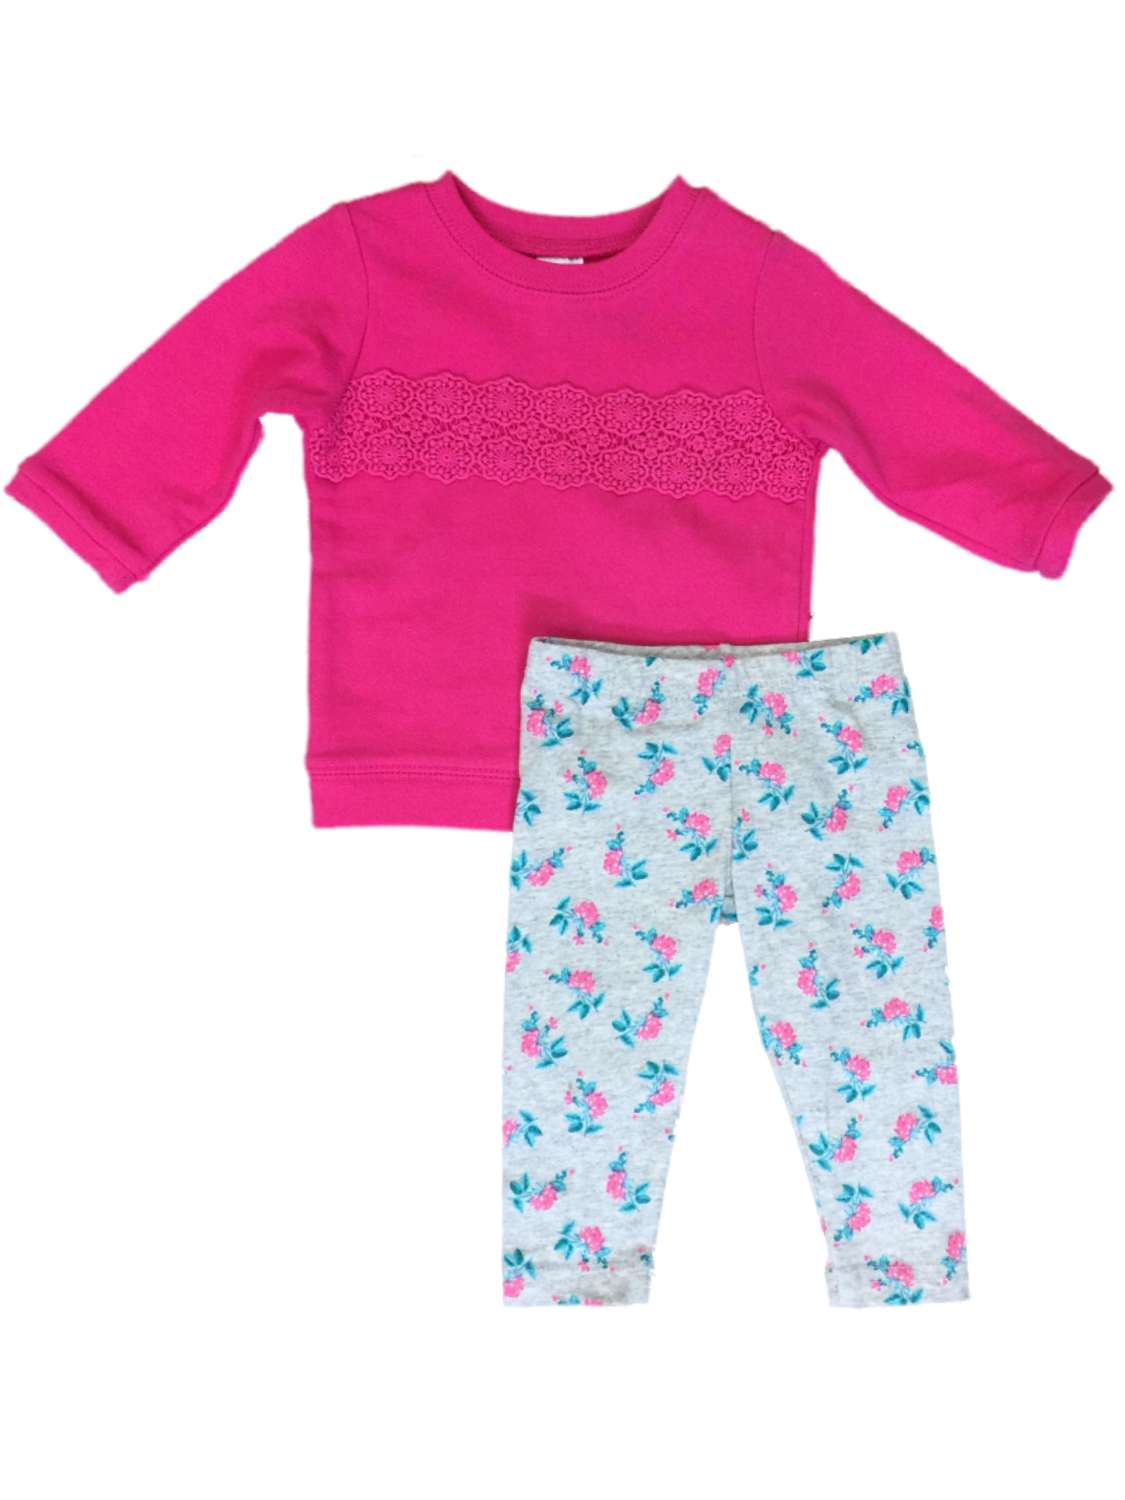 Carter's Carters Infant Girls Pink & Gray Baby Outfit Bodysuit & Floral Leggings 3 Months